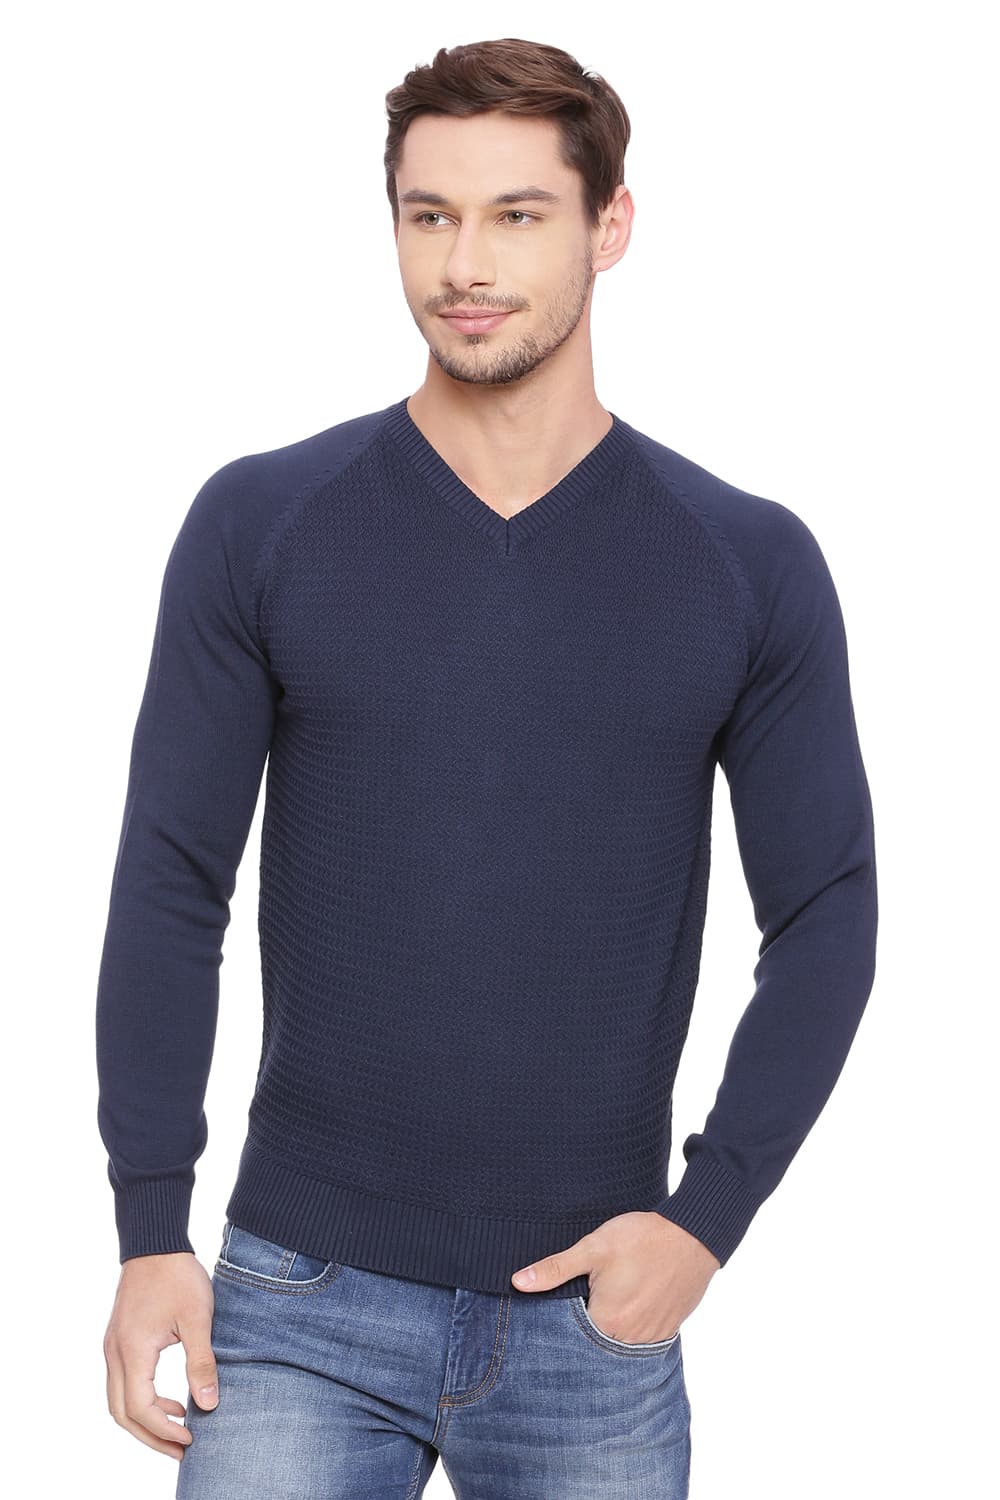 BASICS MUSCLE FIT V NECK SWEATER